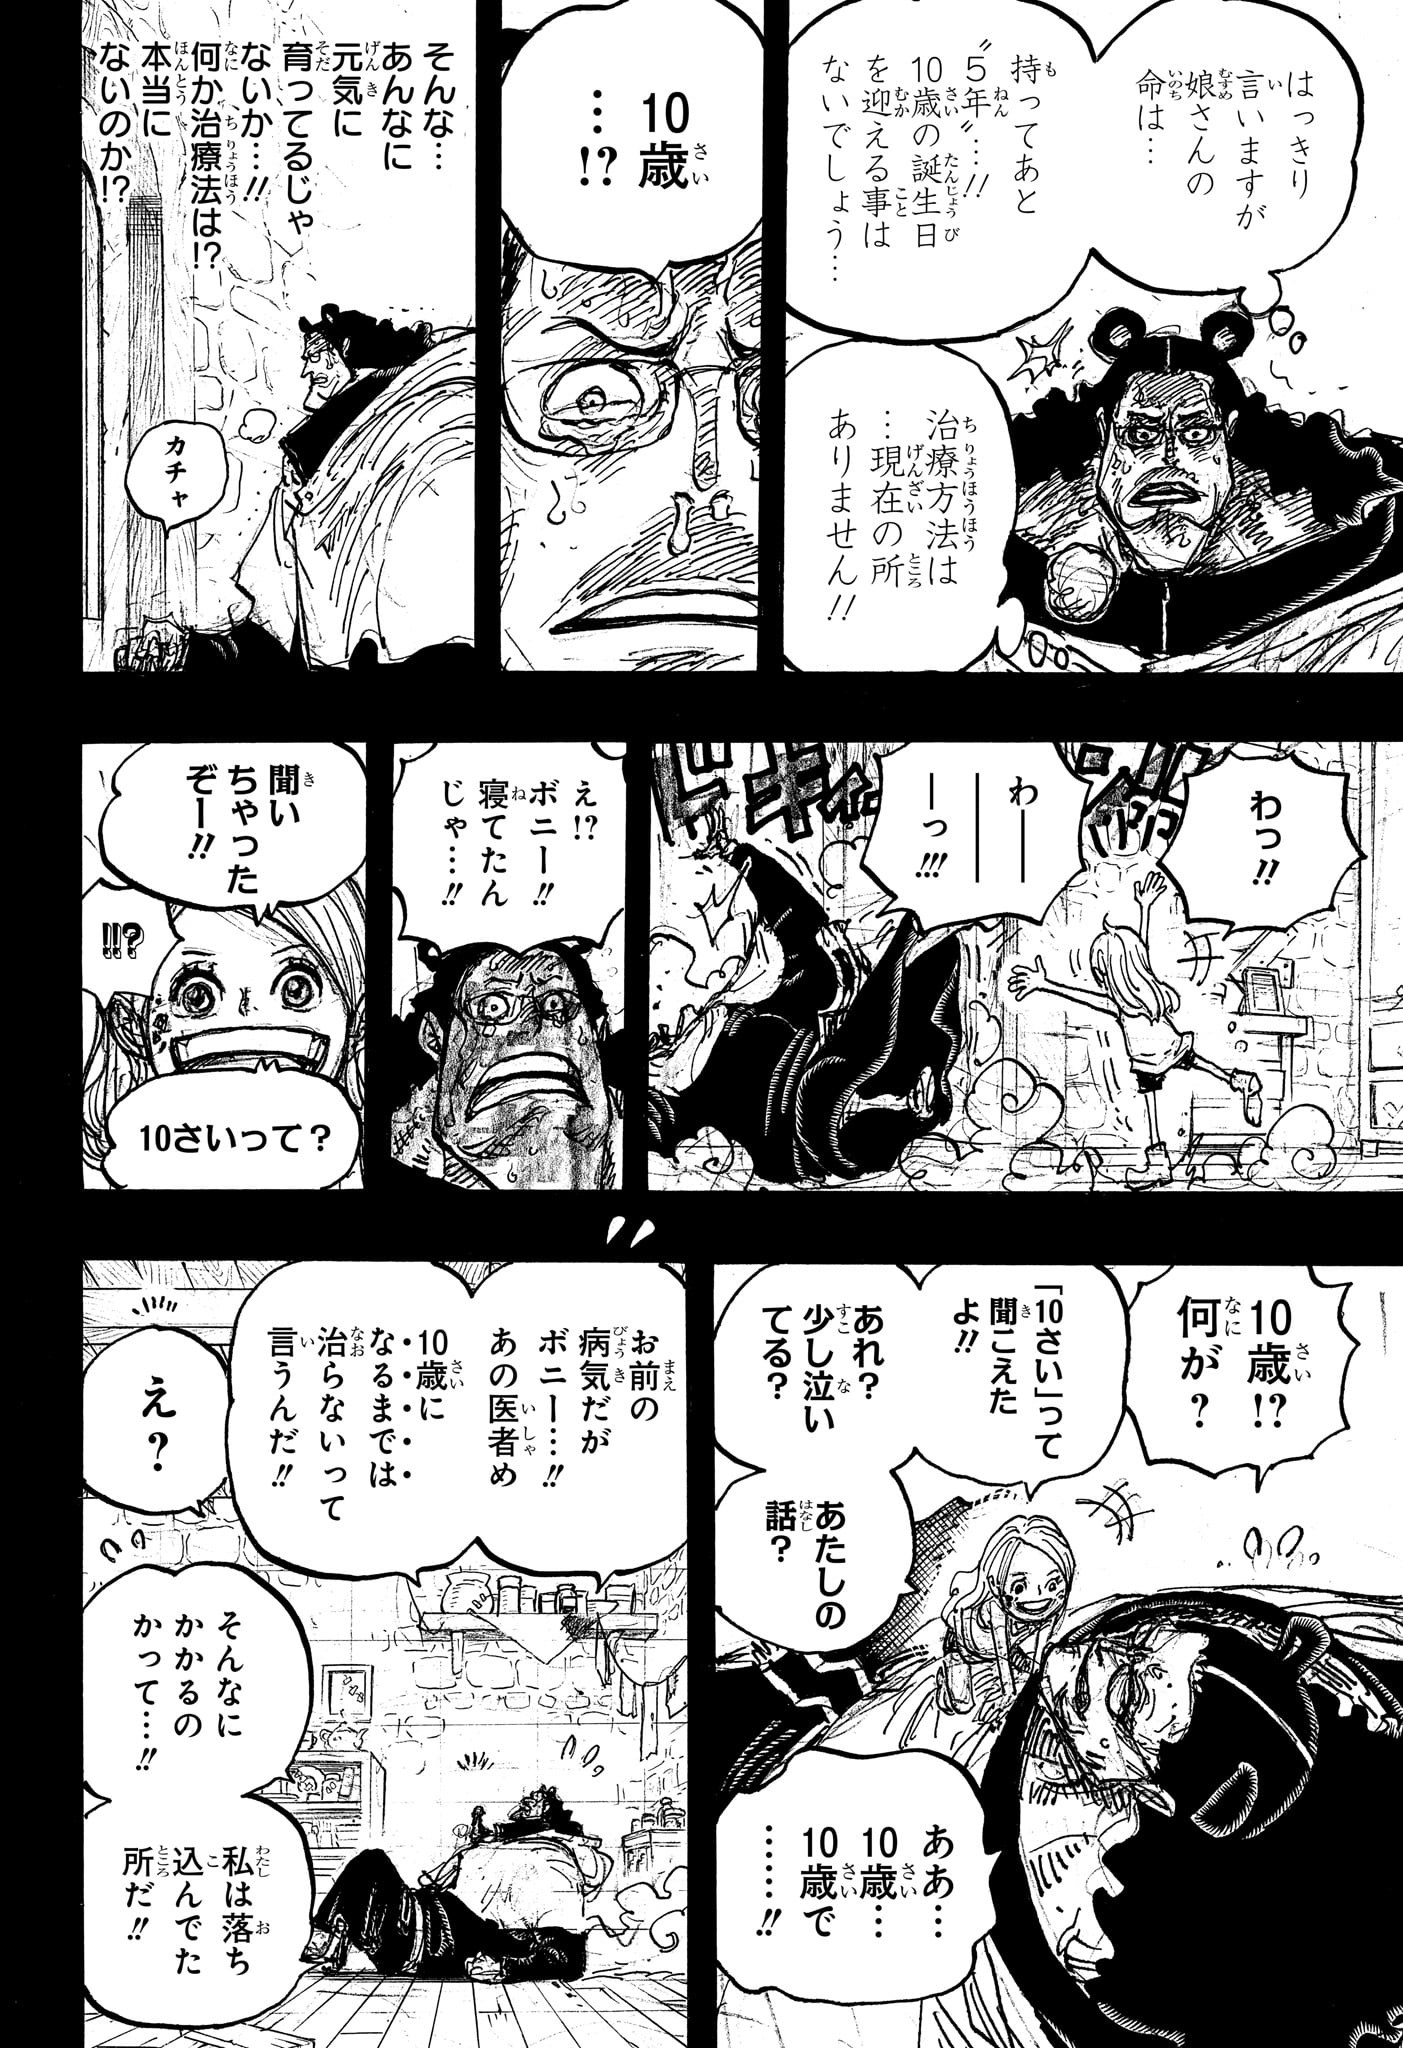 One Piece - Chapter 1098 - Page 14